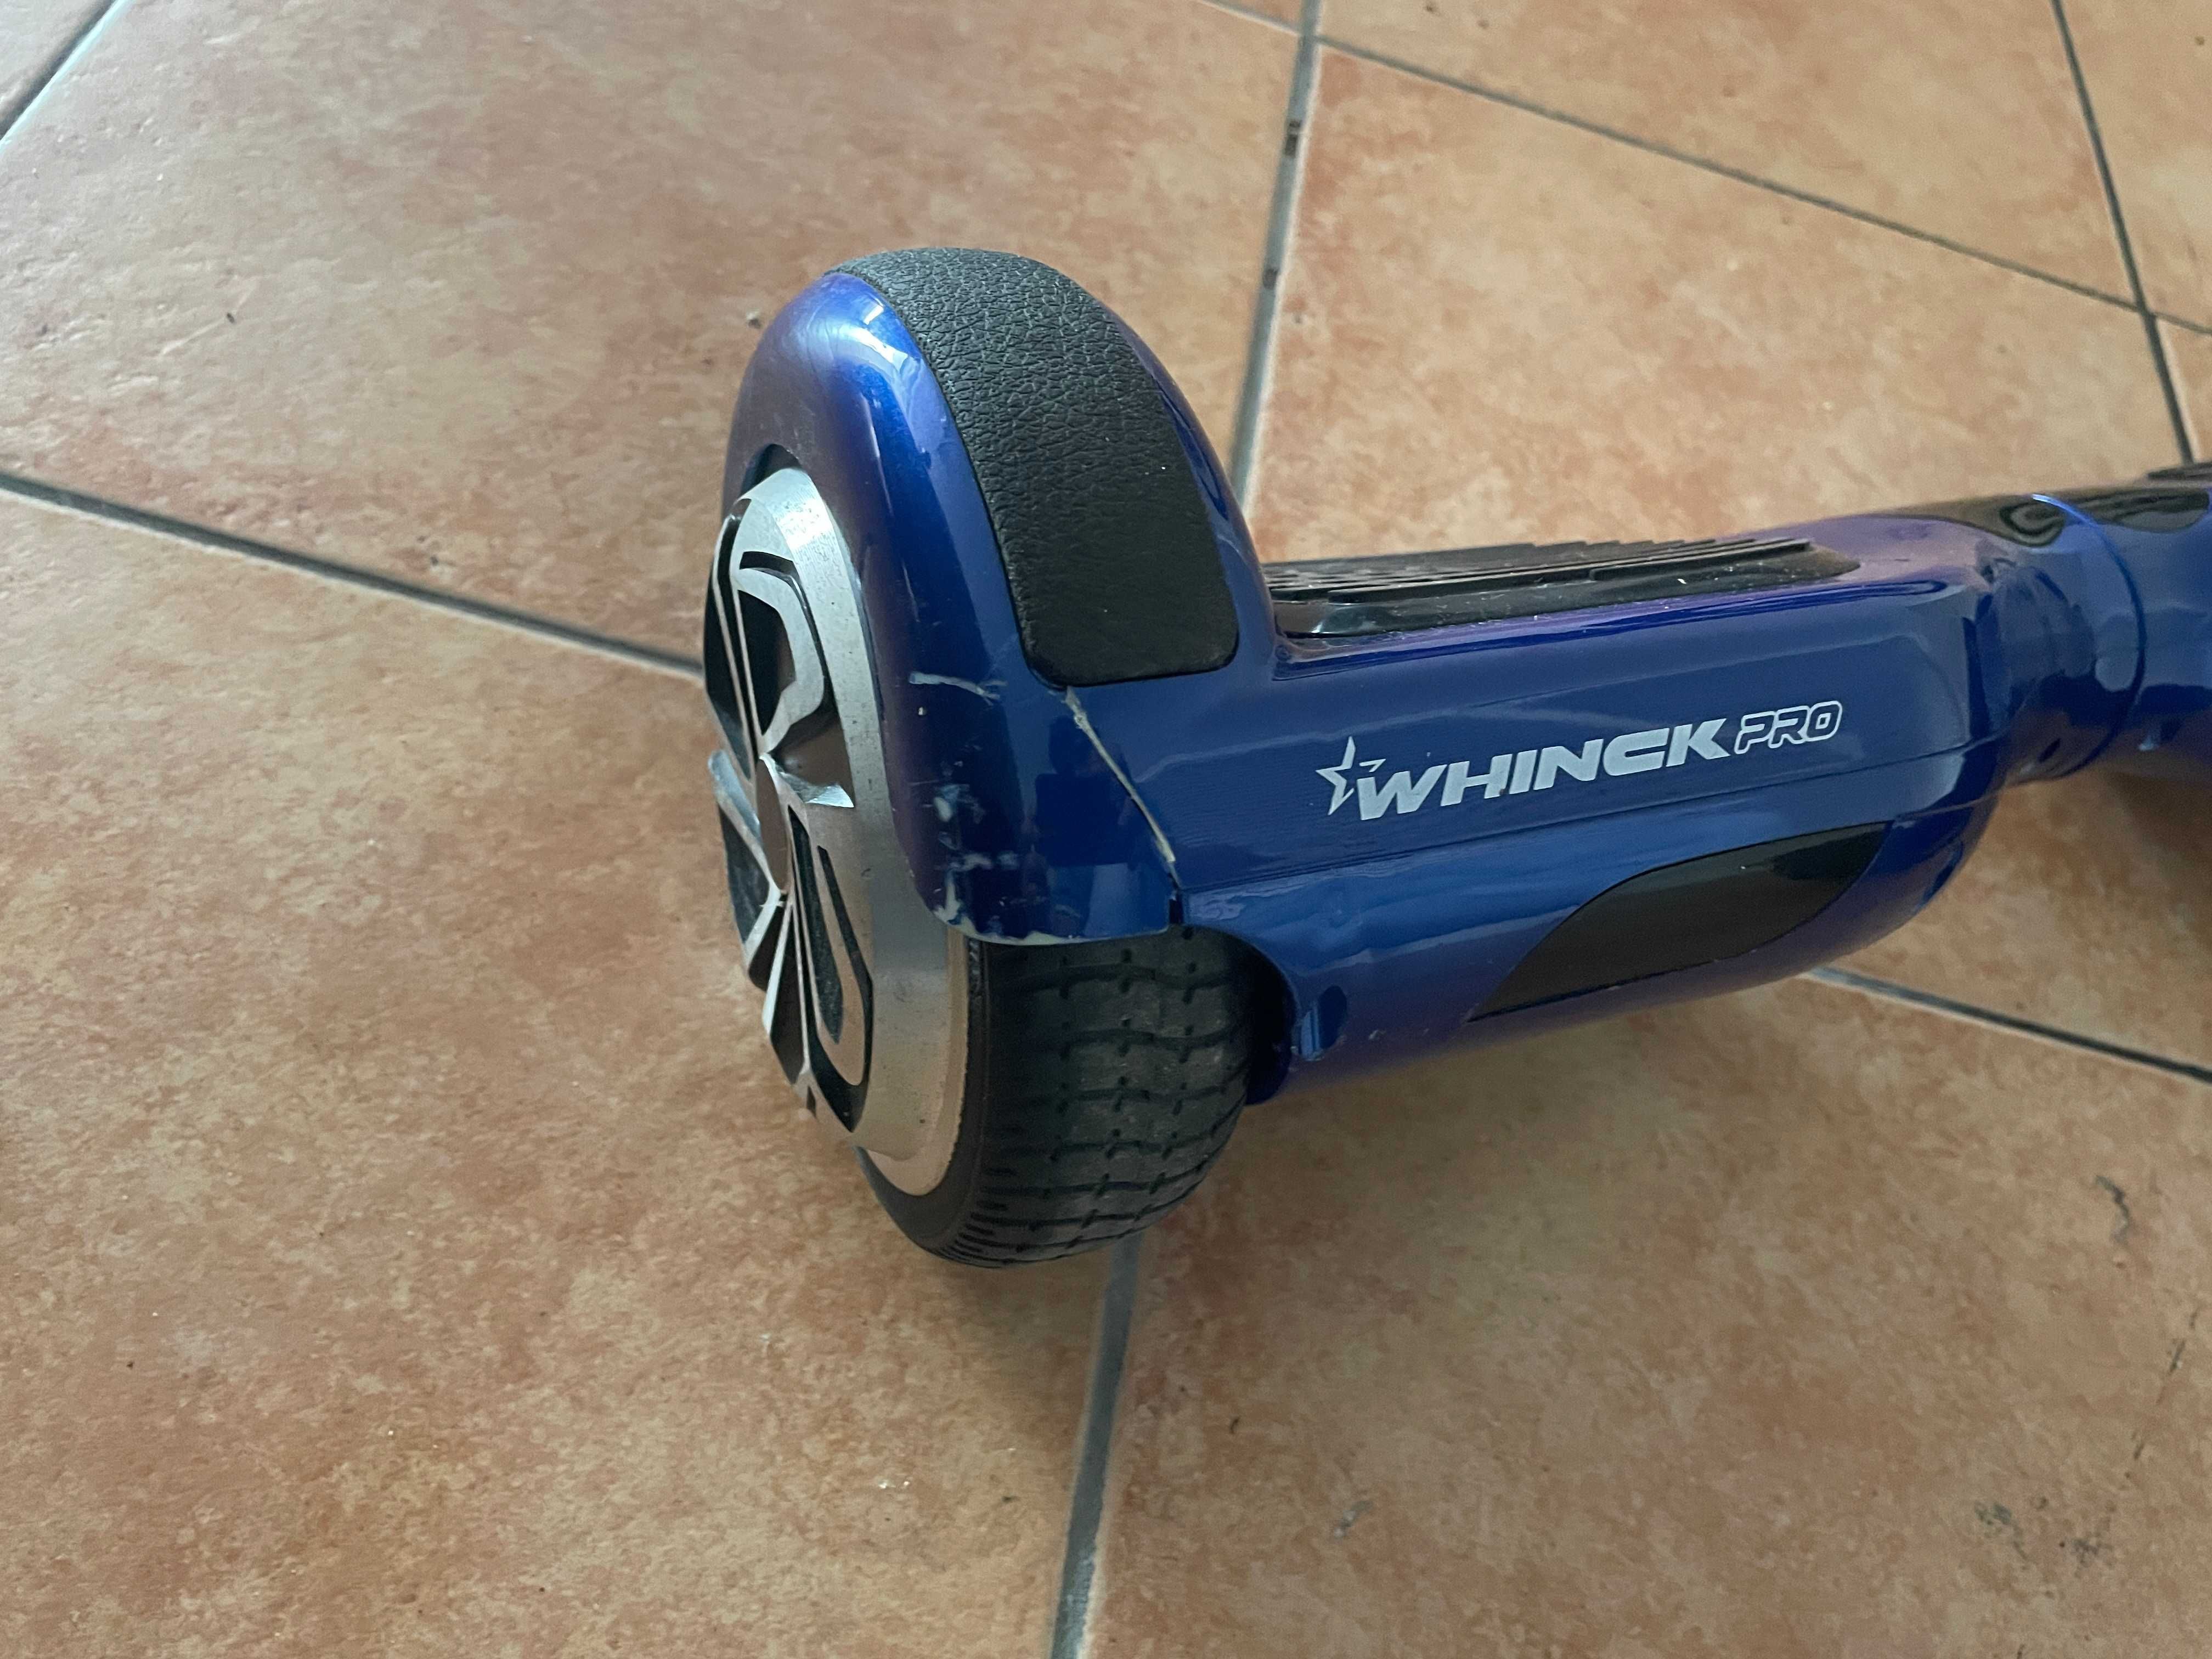 Hoverboard Whinck Pro